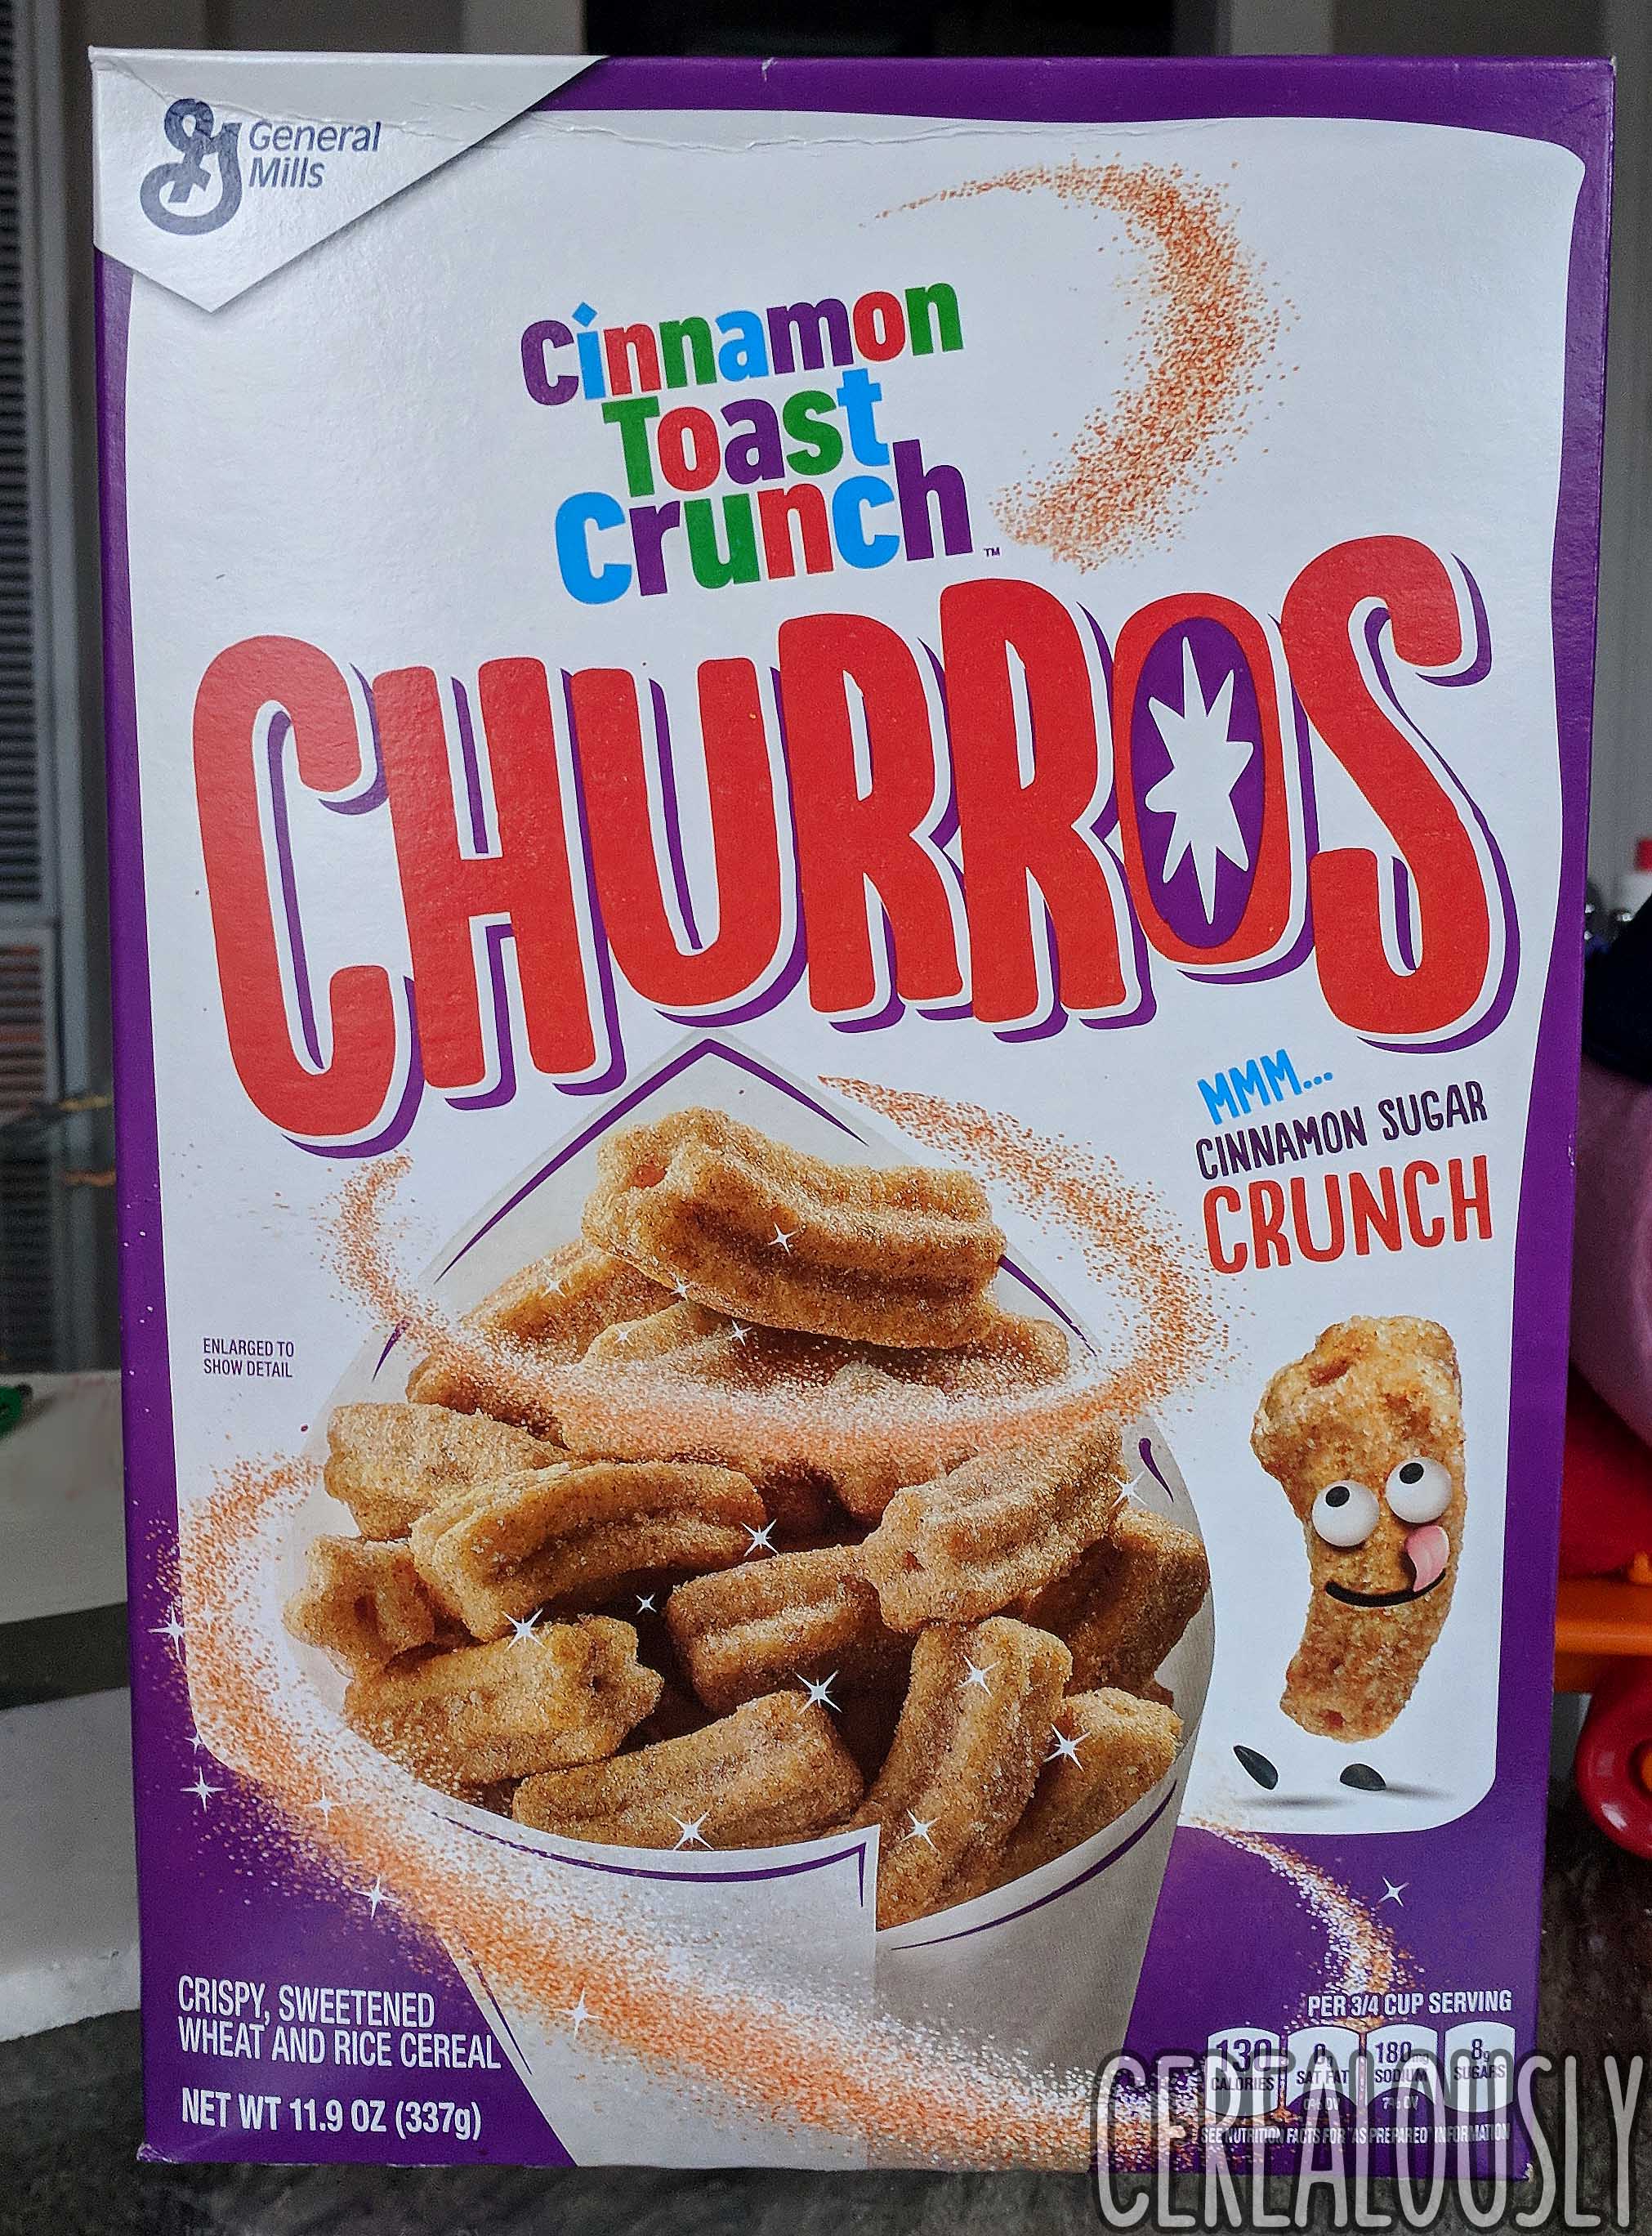 Cinnamon Toast Crunch Churros Cereal Review Box.